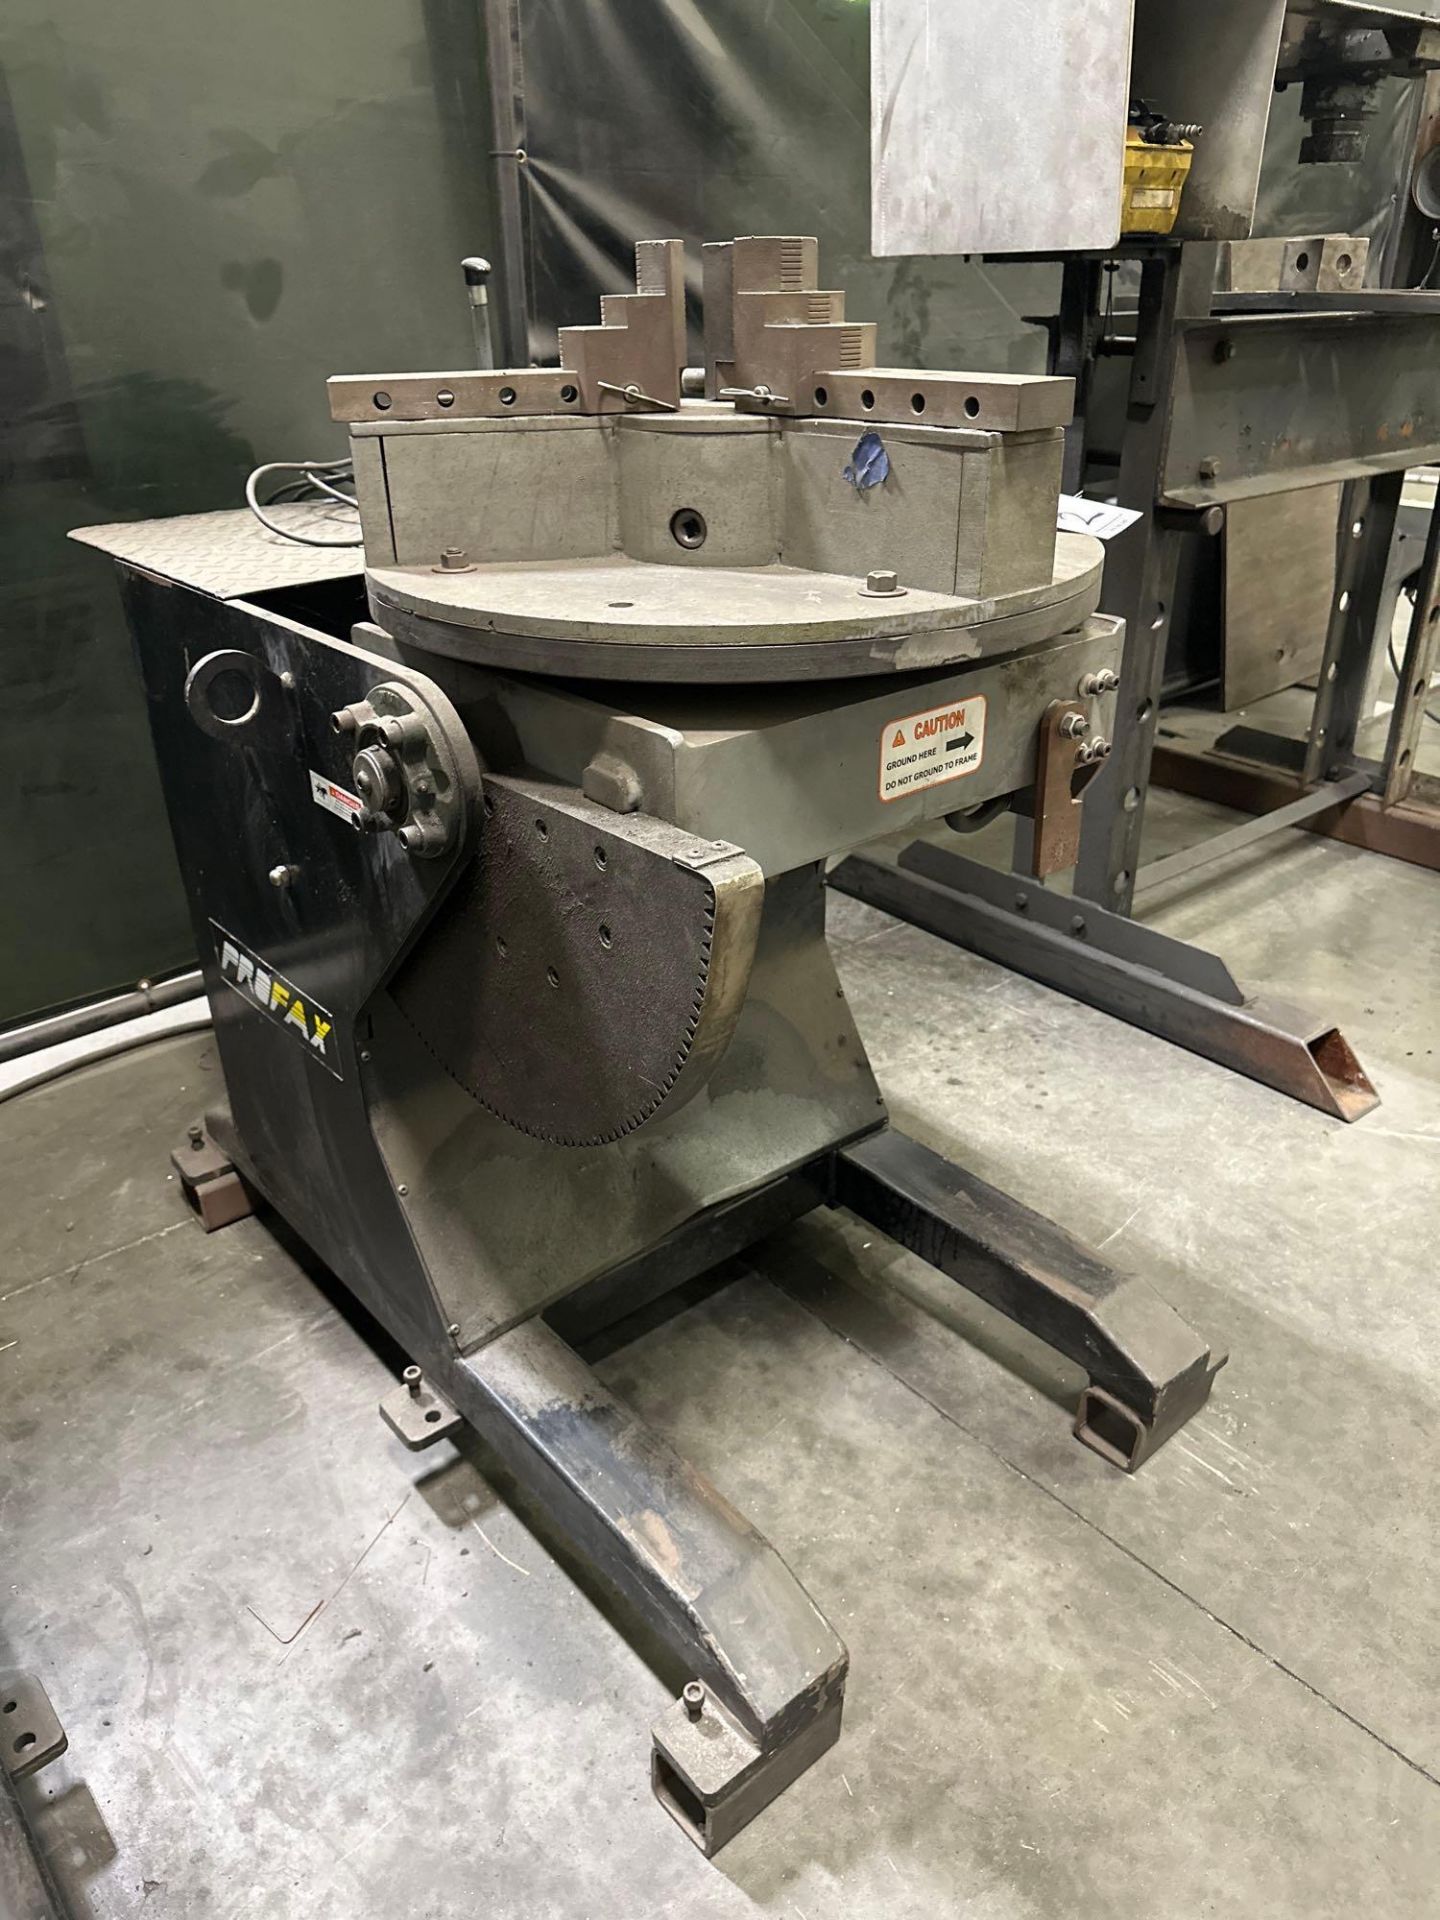 Profax WP-1000 Welding Postioner. 25.5” Table, 2 rpm, 1750lbs Cap, 0-135 Angle, s/n wp10 - 2630 - Image 2 of 7